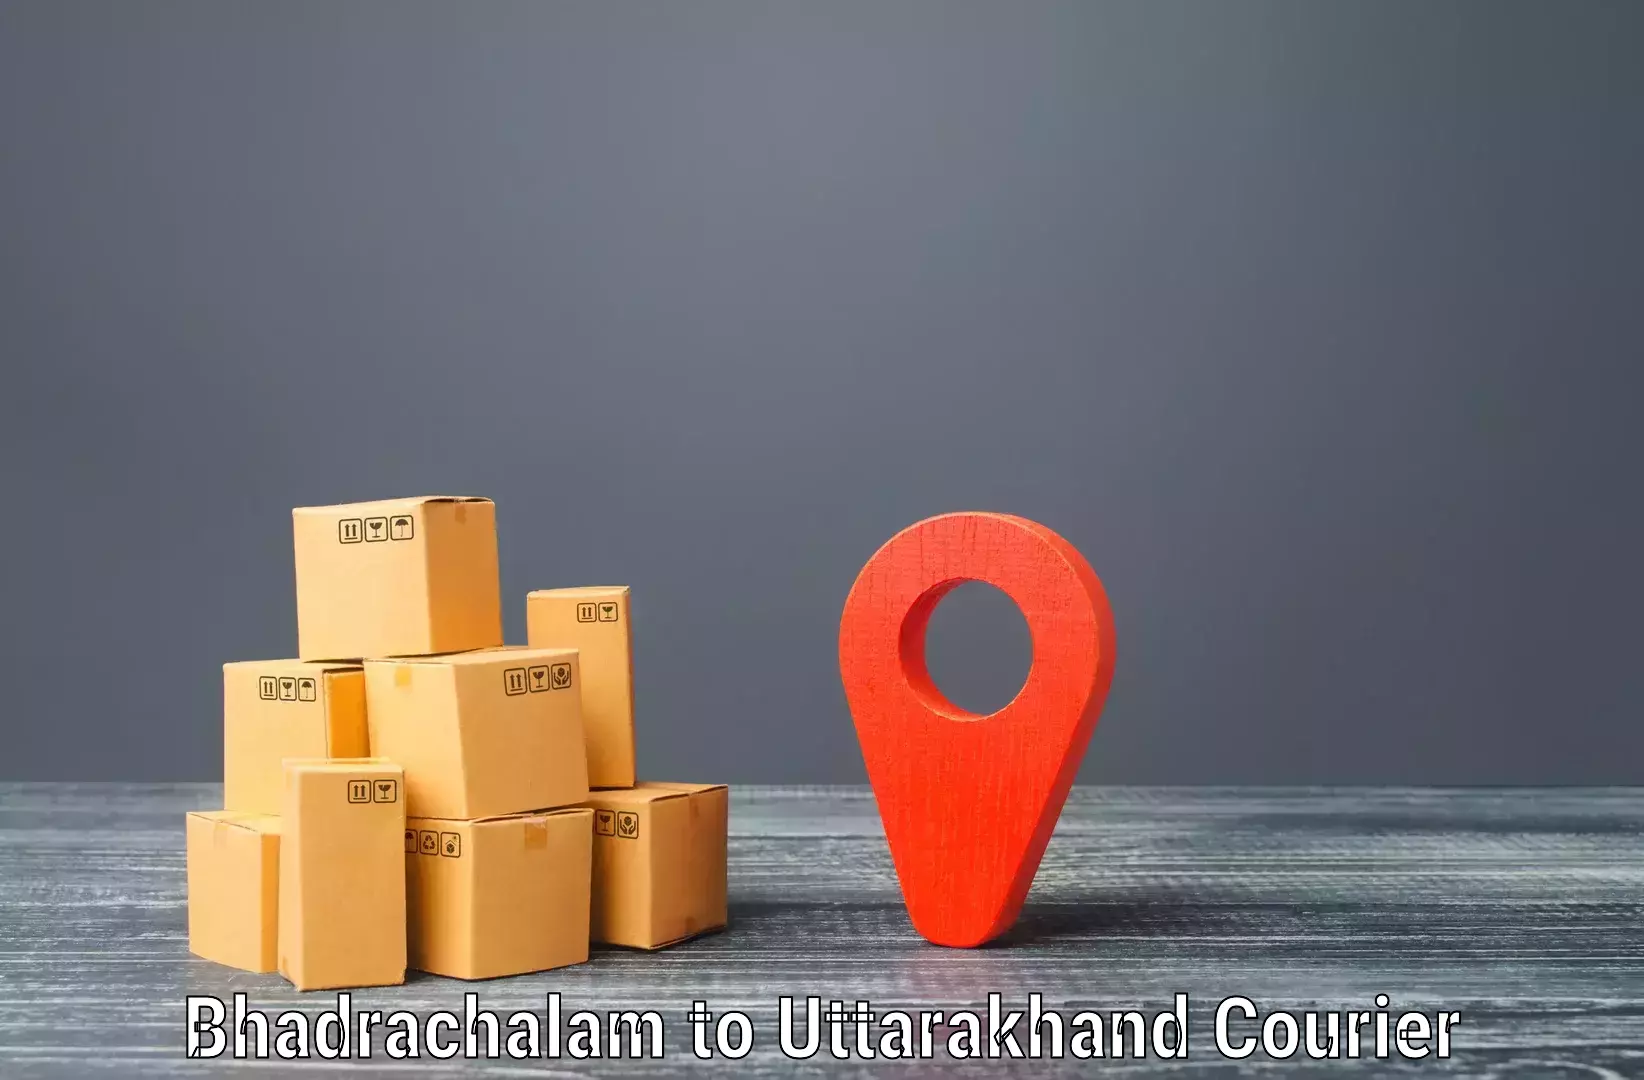 Tech-enabled shipping Bhadrachalam to Kashipur